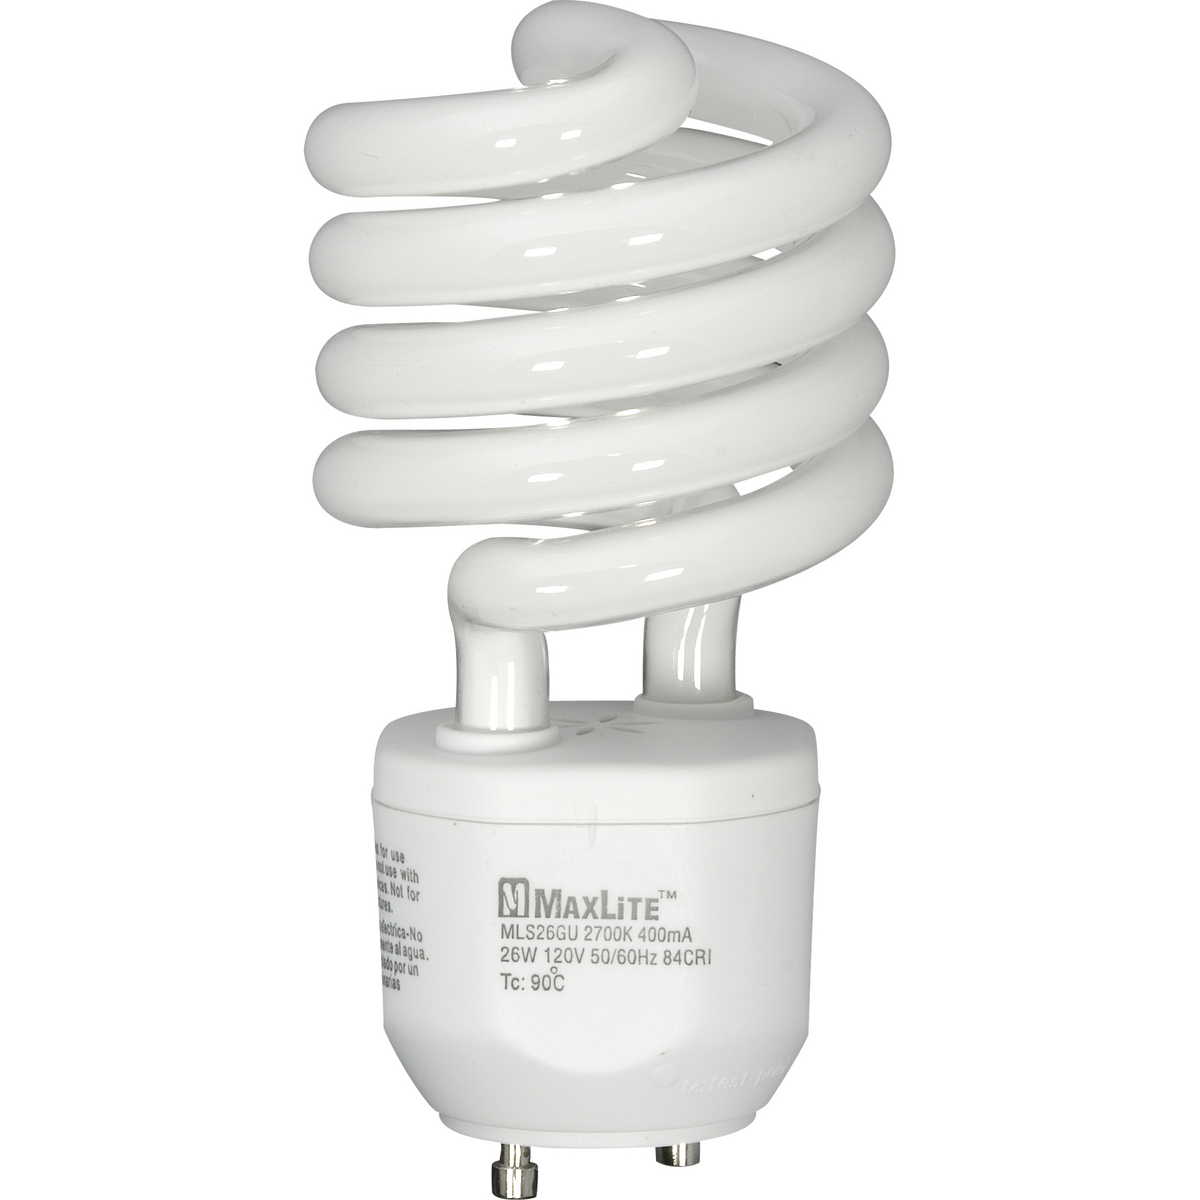 Maxlite 26W self-ballasted CFL lamp with a GU24 base. This 26-watt compact fluorescent light bulb features both energy savings and long-life performance. Soft white appearance is similar to traditional incandescent bulb. GU-24 bi-pin base fits energy efficient light fixtures.